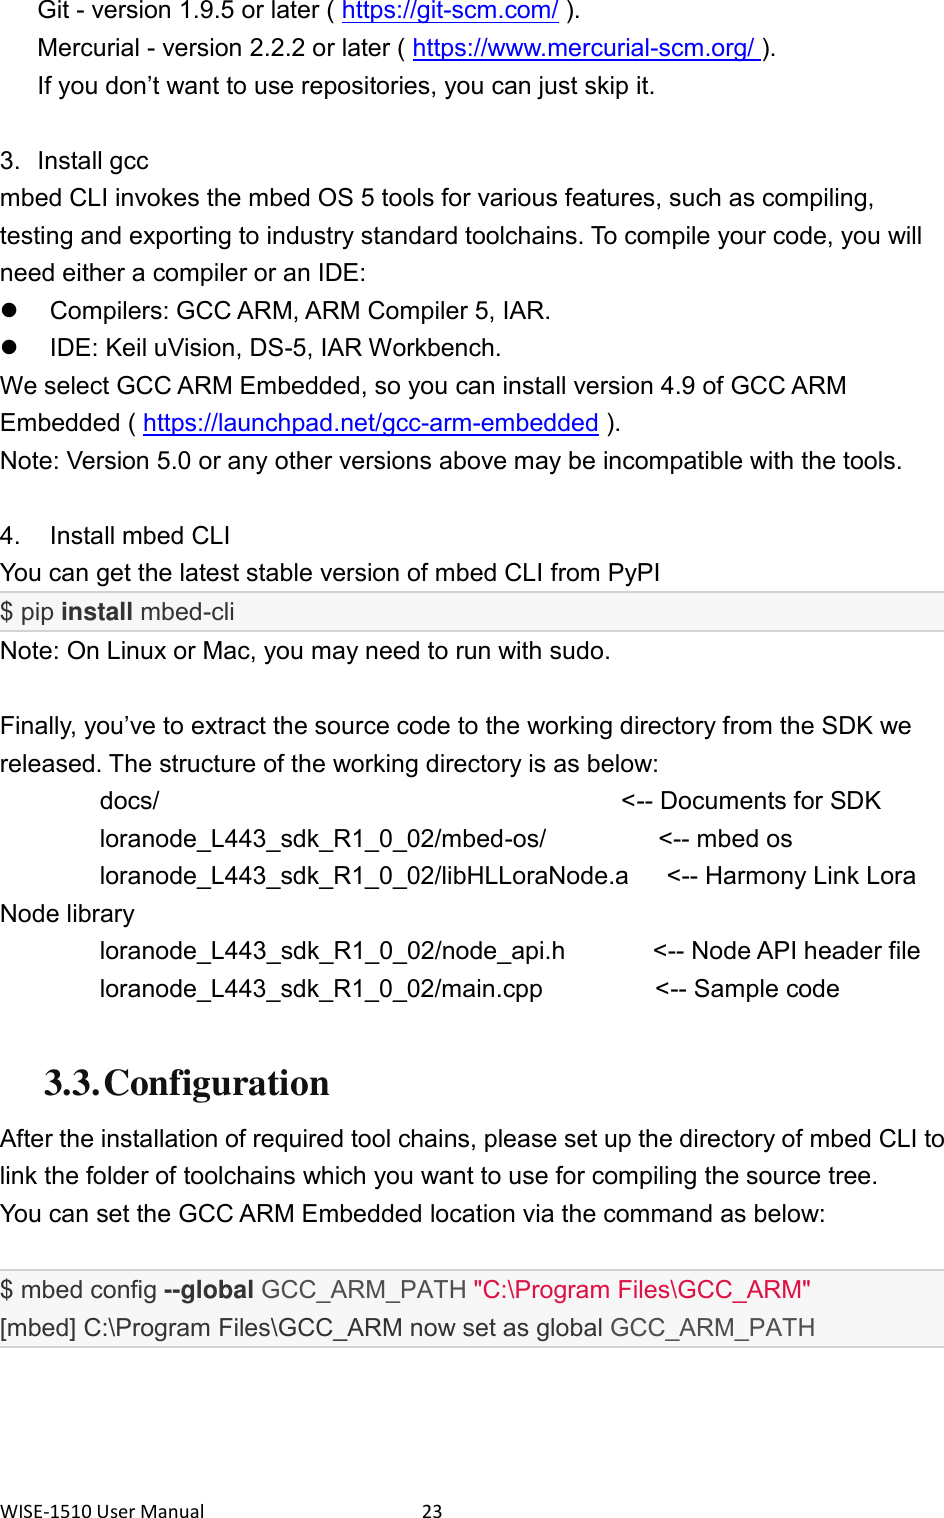 WISE-1510 User Manual  23 Git - version 1.9.5 or later ( https://git-scm.com/ ). Mercurial - version 2.2.2 or later ( https://www.mercurial-scm.org/ ). If you don’t want to use repositories, you can just skip it.  3.  Install gcc mbed CLI invokes the mbed OS 5 tools for various features, such as compiling, testing and exporting to industry standard toolchains. To compile your code, you will need either a compiler or an IDE:   Compilers: GCC ARM, ARM Compiler 5, IAR.   IDE: Keil uVision, DS-5, IAR Workbench. We select GCC ARM Embedded, so you can install version 4.9 of GCC ARM Embedded ( https://launchpad.net/gcc-arm-embedded ).   Note: Version 5.0 or any other versions above may be incompatible with the tools.  4.    Install mbed CLI You can get the latest stable version of mbed CLI from PyPI   $ pip install mbed-cli Note: On Linux or Mac, you may need to run with sudo.  Finally, you’ve to extract the source code to the working directory from the SDK we released. The structure of the working directory is as below: docs/                                     &lt;-- Documents for SDK      loranode_L443_sdk_R1_0_02/mbed-os/                  &lt;-- mbed os      loranode_L443_sdk_R1_0_02/libHLLoraNode.a      &lt;-- Harmony Link Lora Node library      loranode_L443_sdk_R1_0_02/node_api.h              &lt;-- Node API header file      loranode_L443_sdk_R1_0_02/main.cpp                  &lt;-- Sample code  3.3. Configuration After the installation of required tool chains, please set up the directory of mbed CLI to link the folder of toolchains which you want to use for compiling the source tree. You can set the GCC ARM Embedded location via the command as below:  $ mbed config --global GCC_ARM_PATH &quot;C:\Program Files\GCC_ARM&quot; [mbed] C:\Program Files\GCC_ARM now set as global GCC_ARM_PATH    